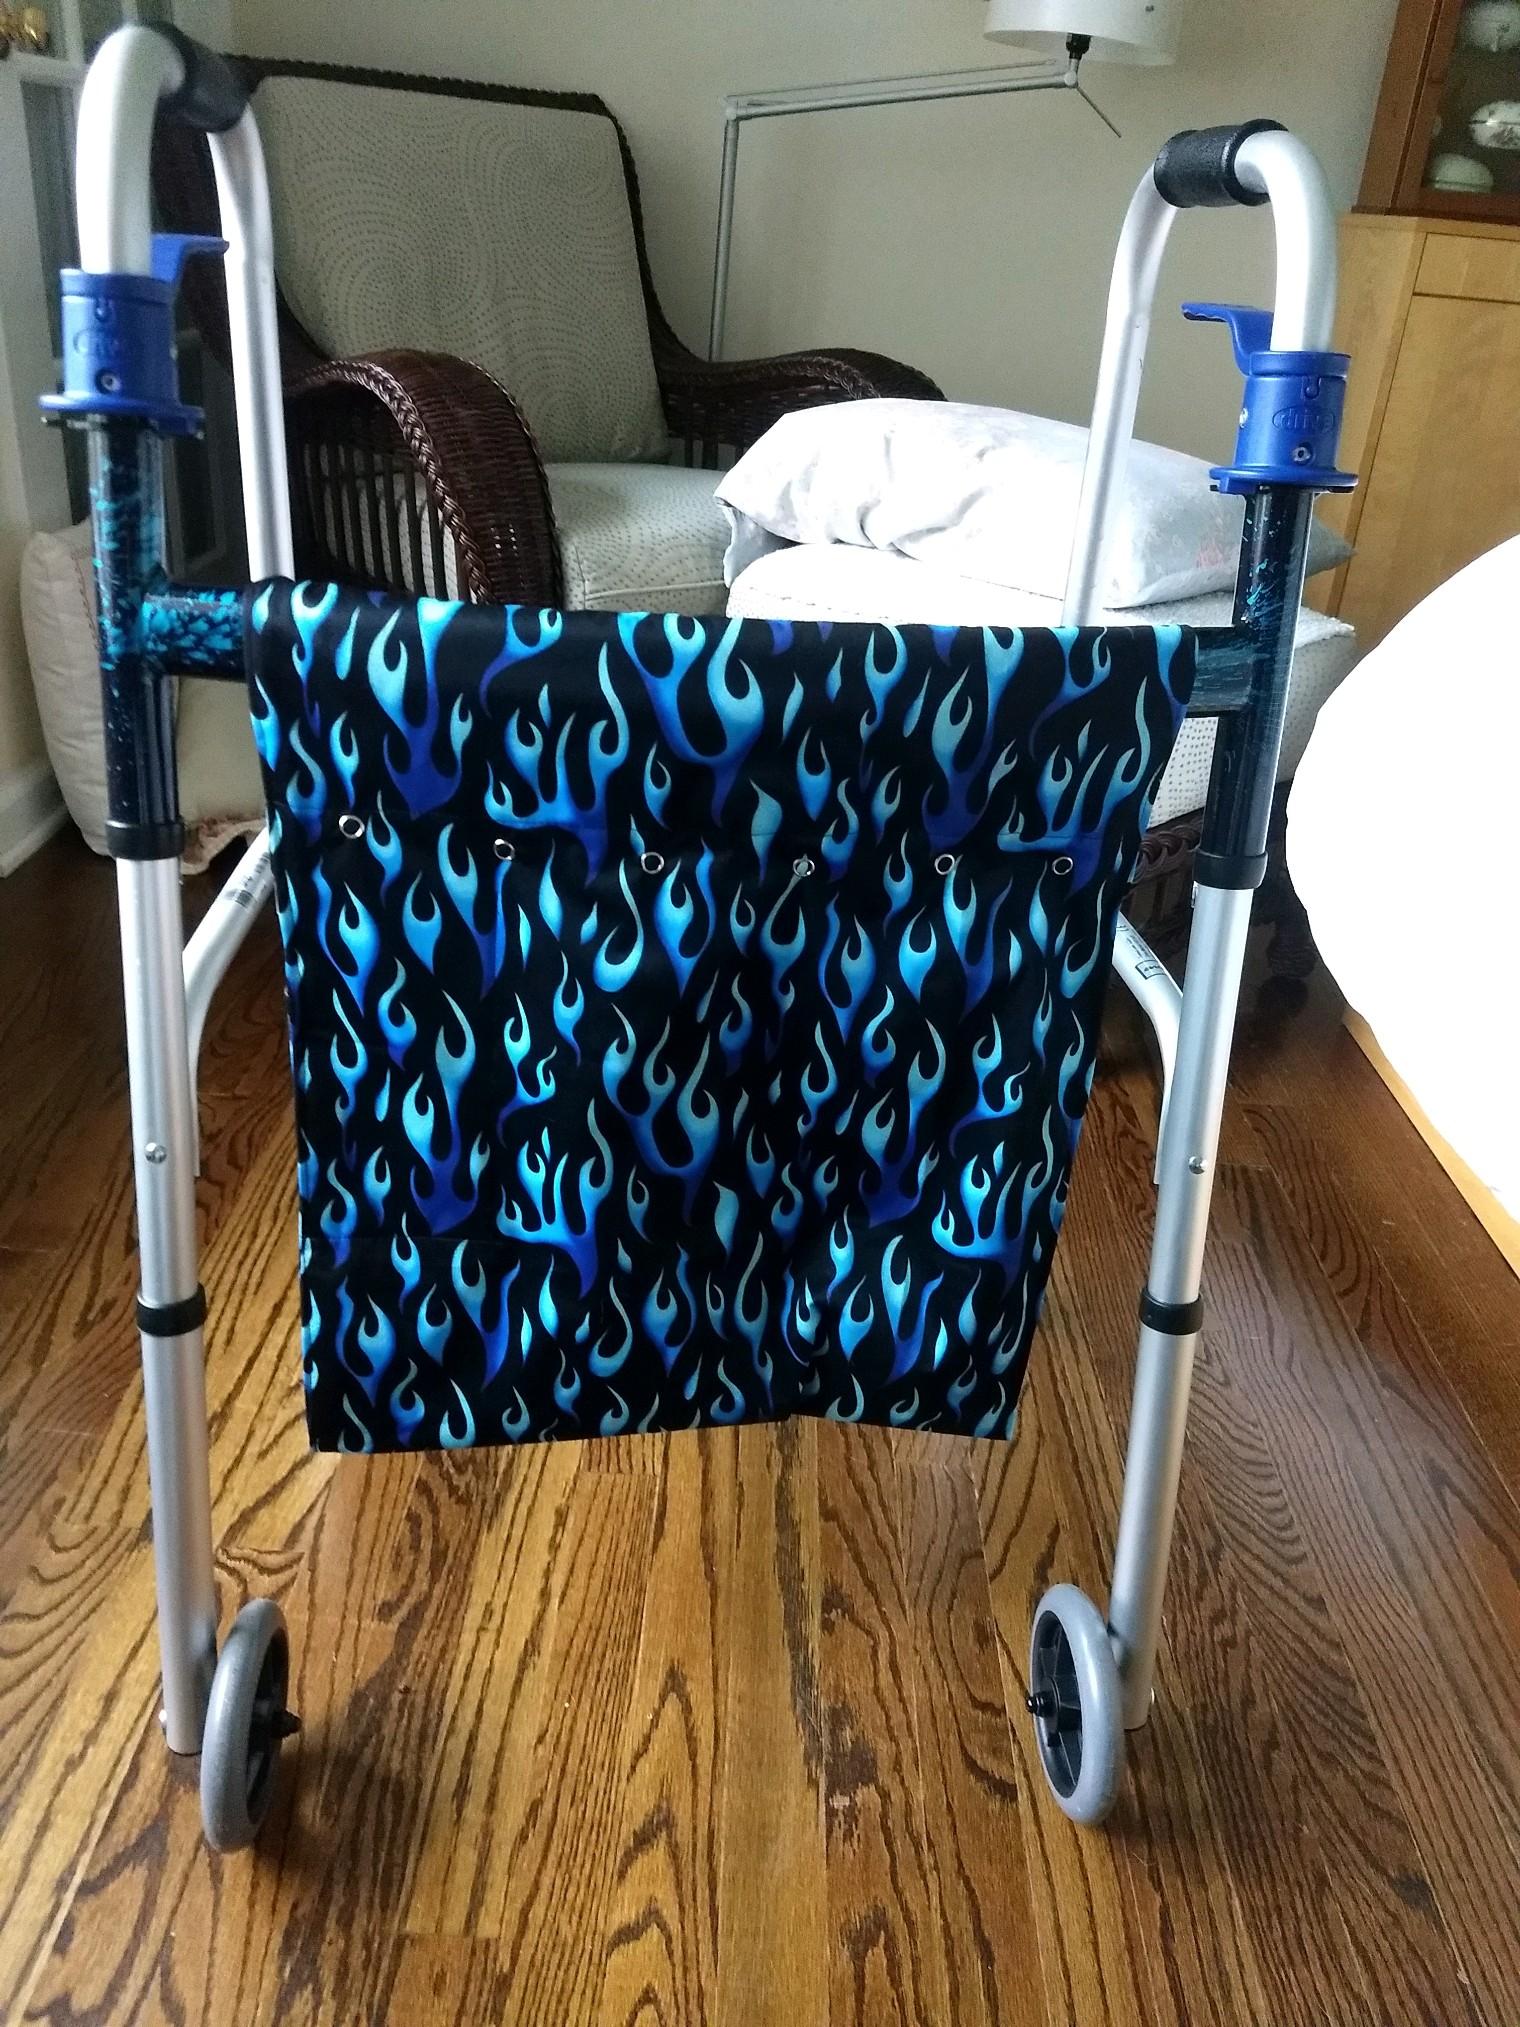 The black sewn bag with blue flames  on a walker